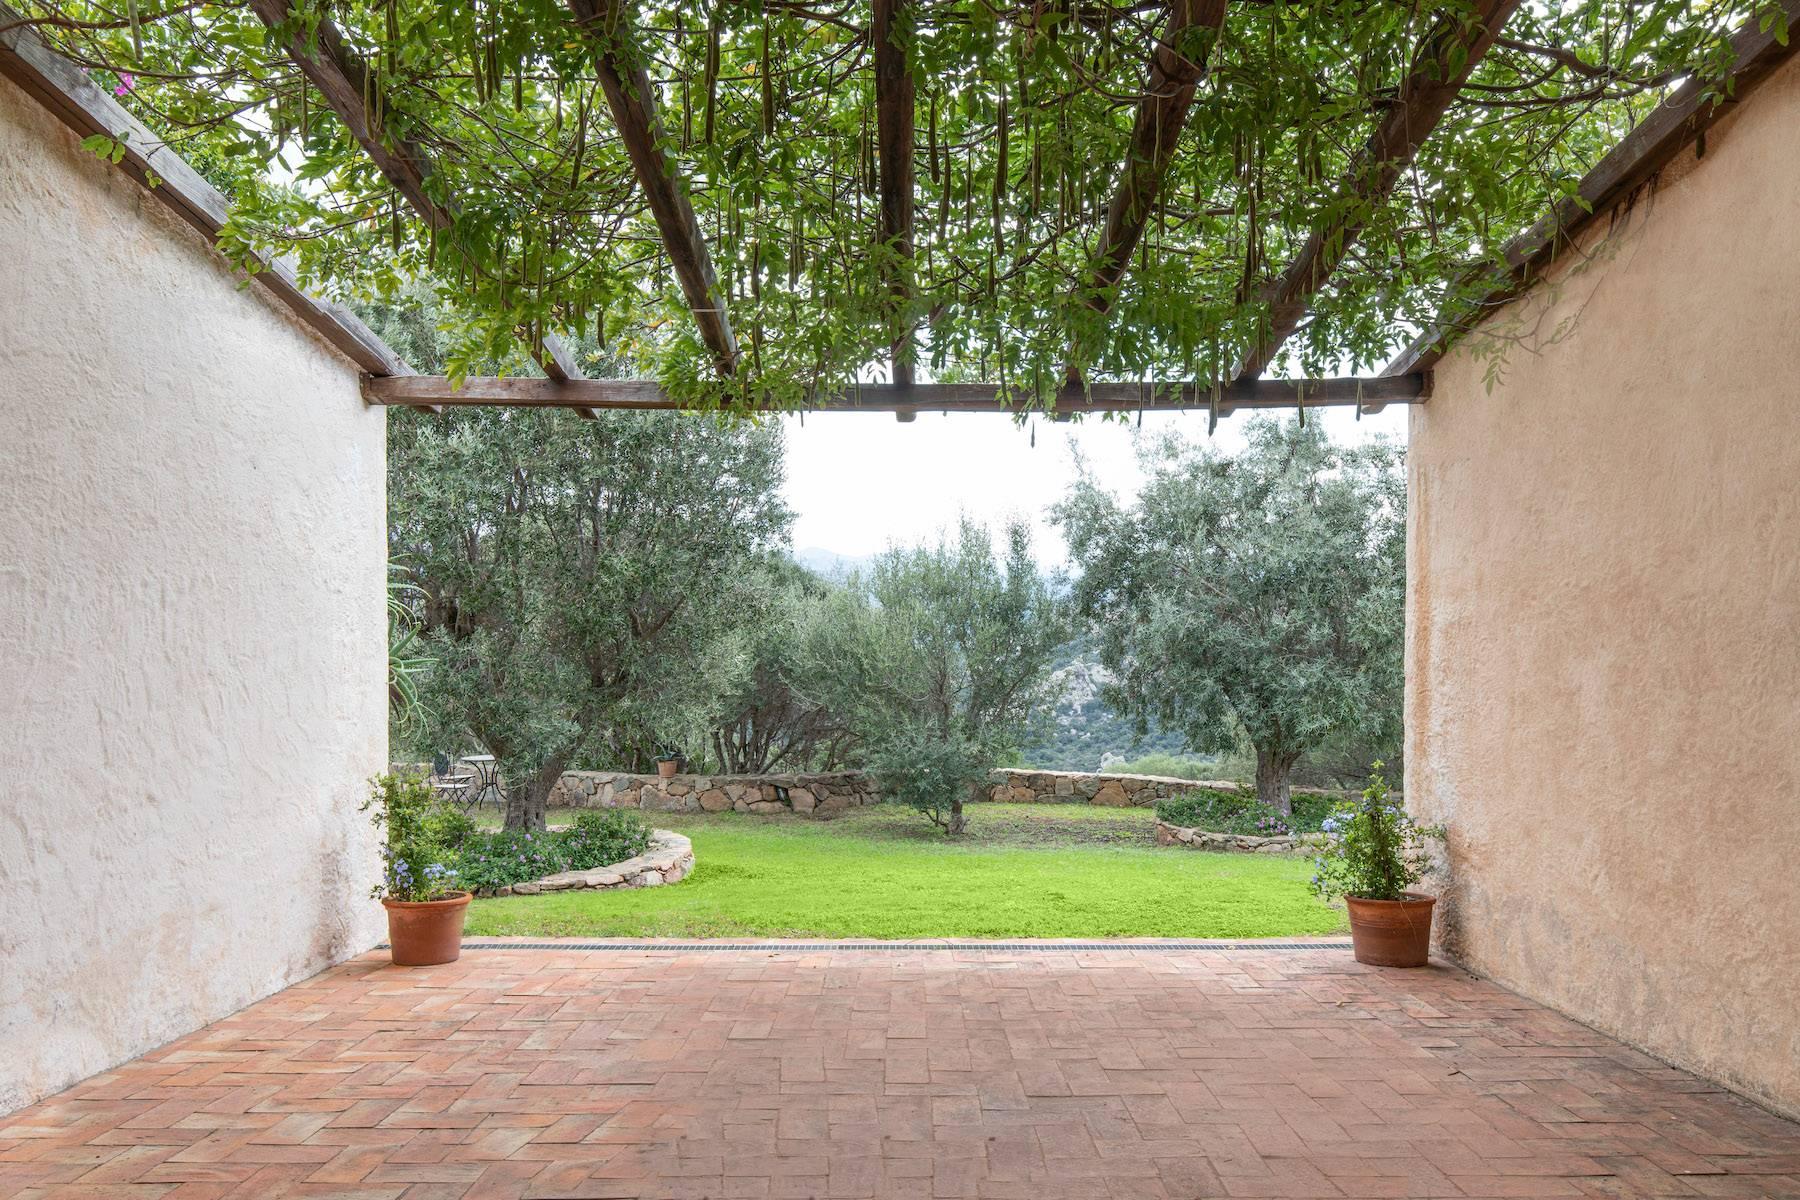 Splendid estate, surrounded by Mediterranean vegetation, overlooking the Gulf of Cannigione - 28